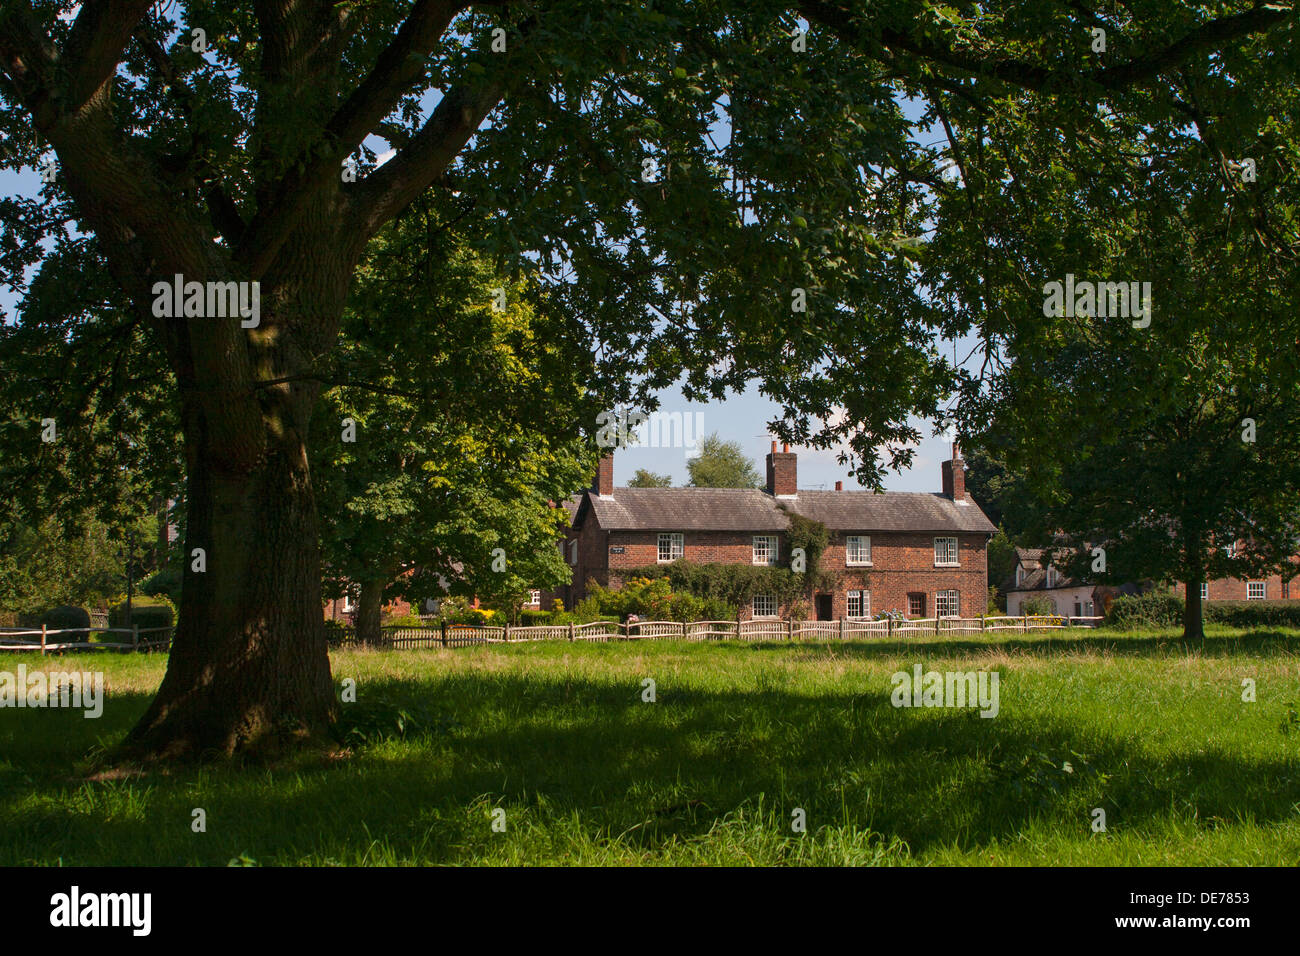 Inghilterra, Cheshire, Styal Village Cottages Foto Stock